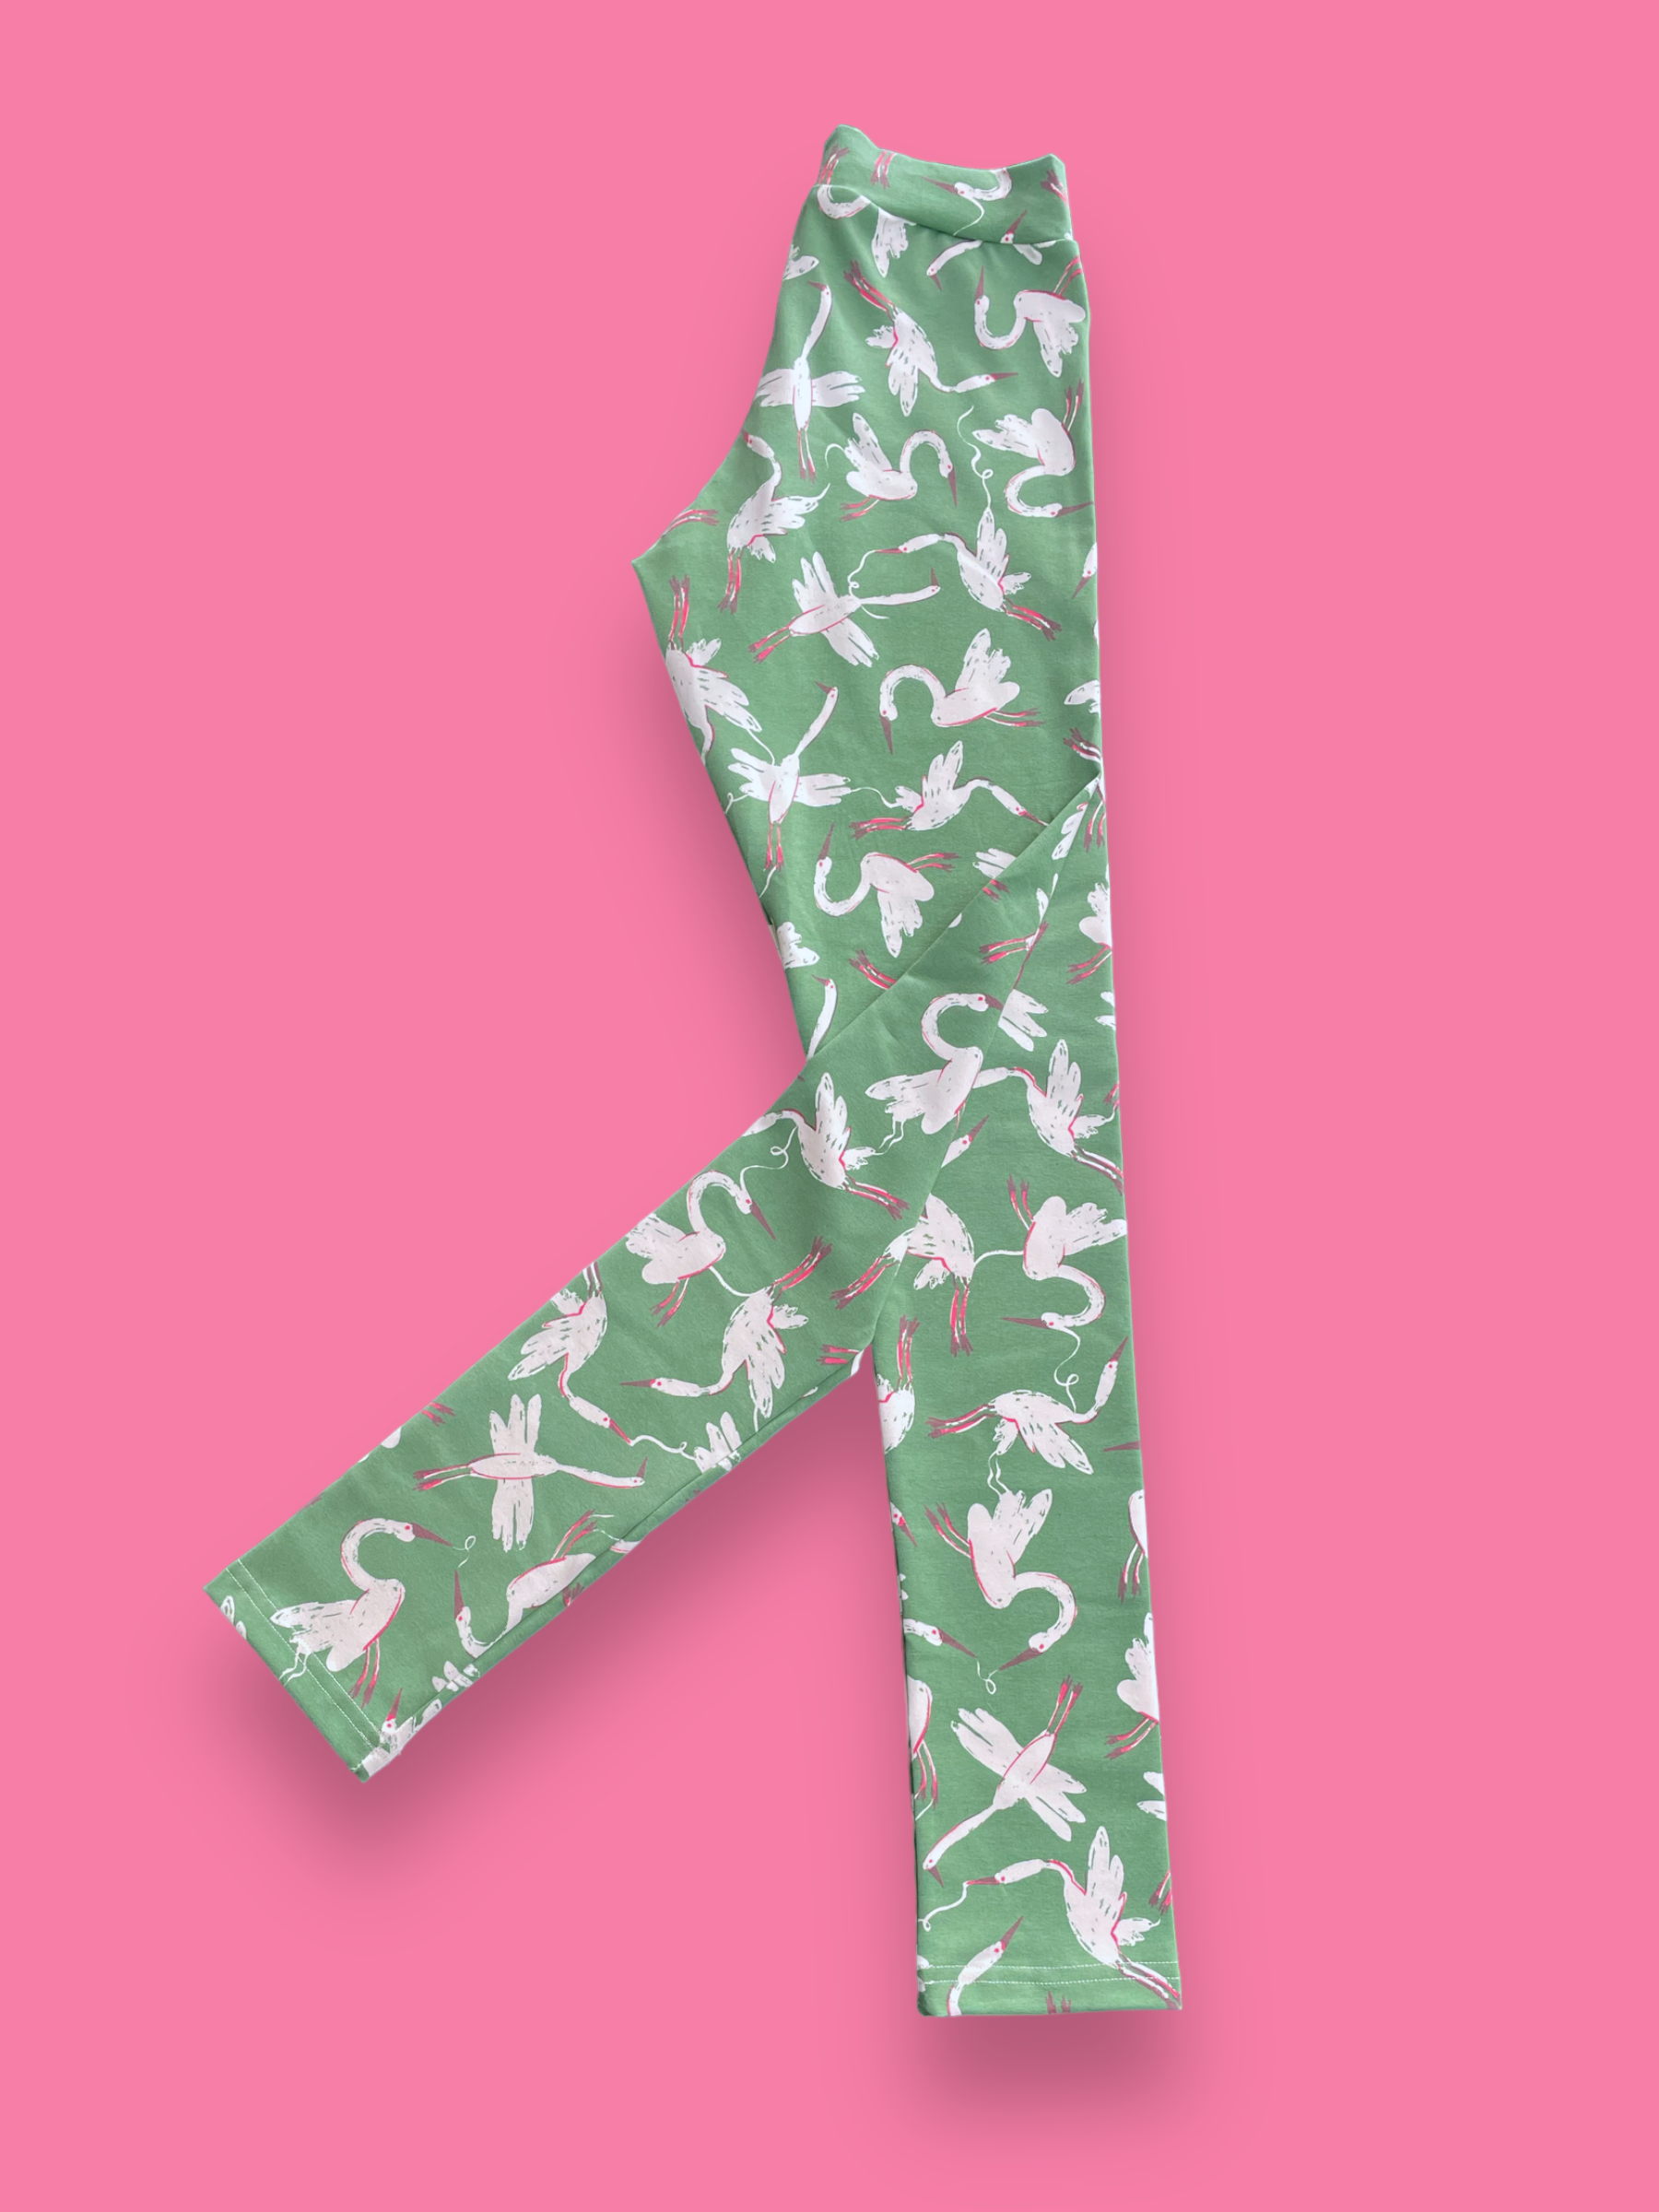 White swans with pink legs and a vintage green background printed on long adults tights layed flat.